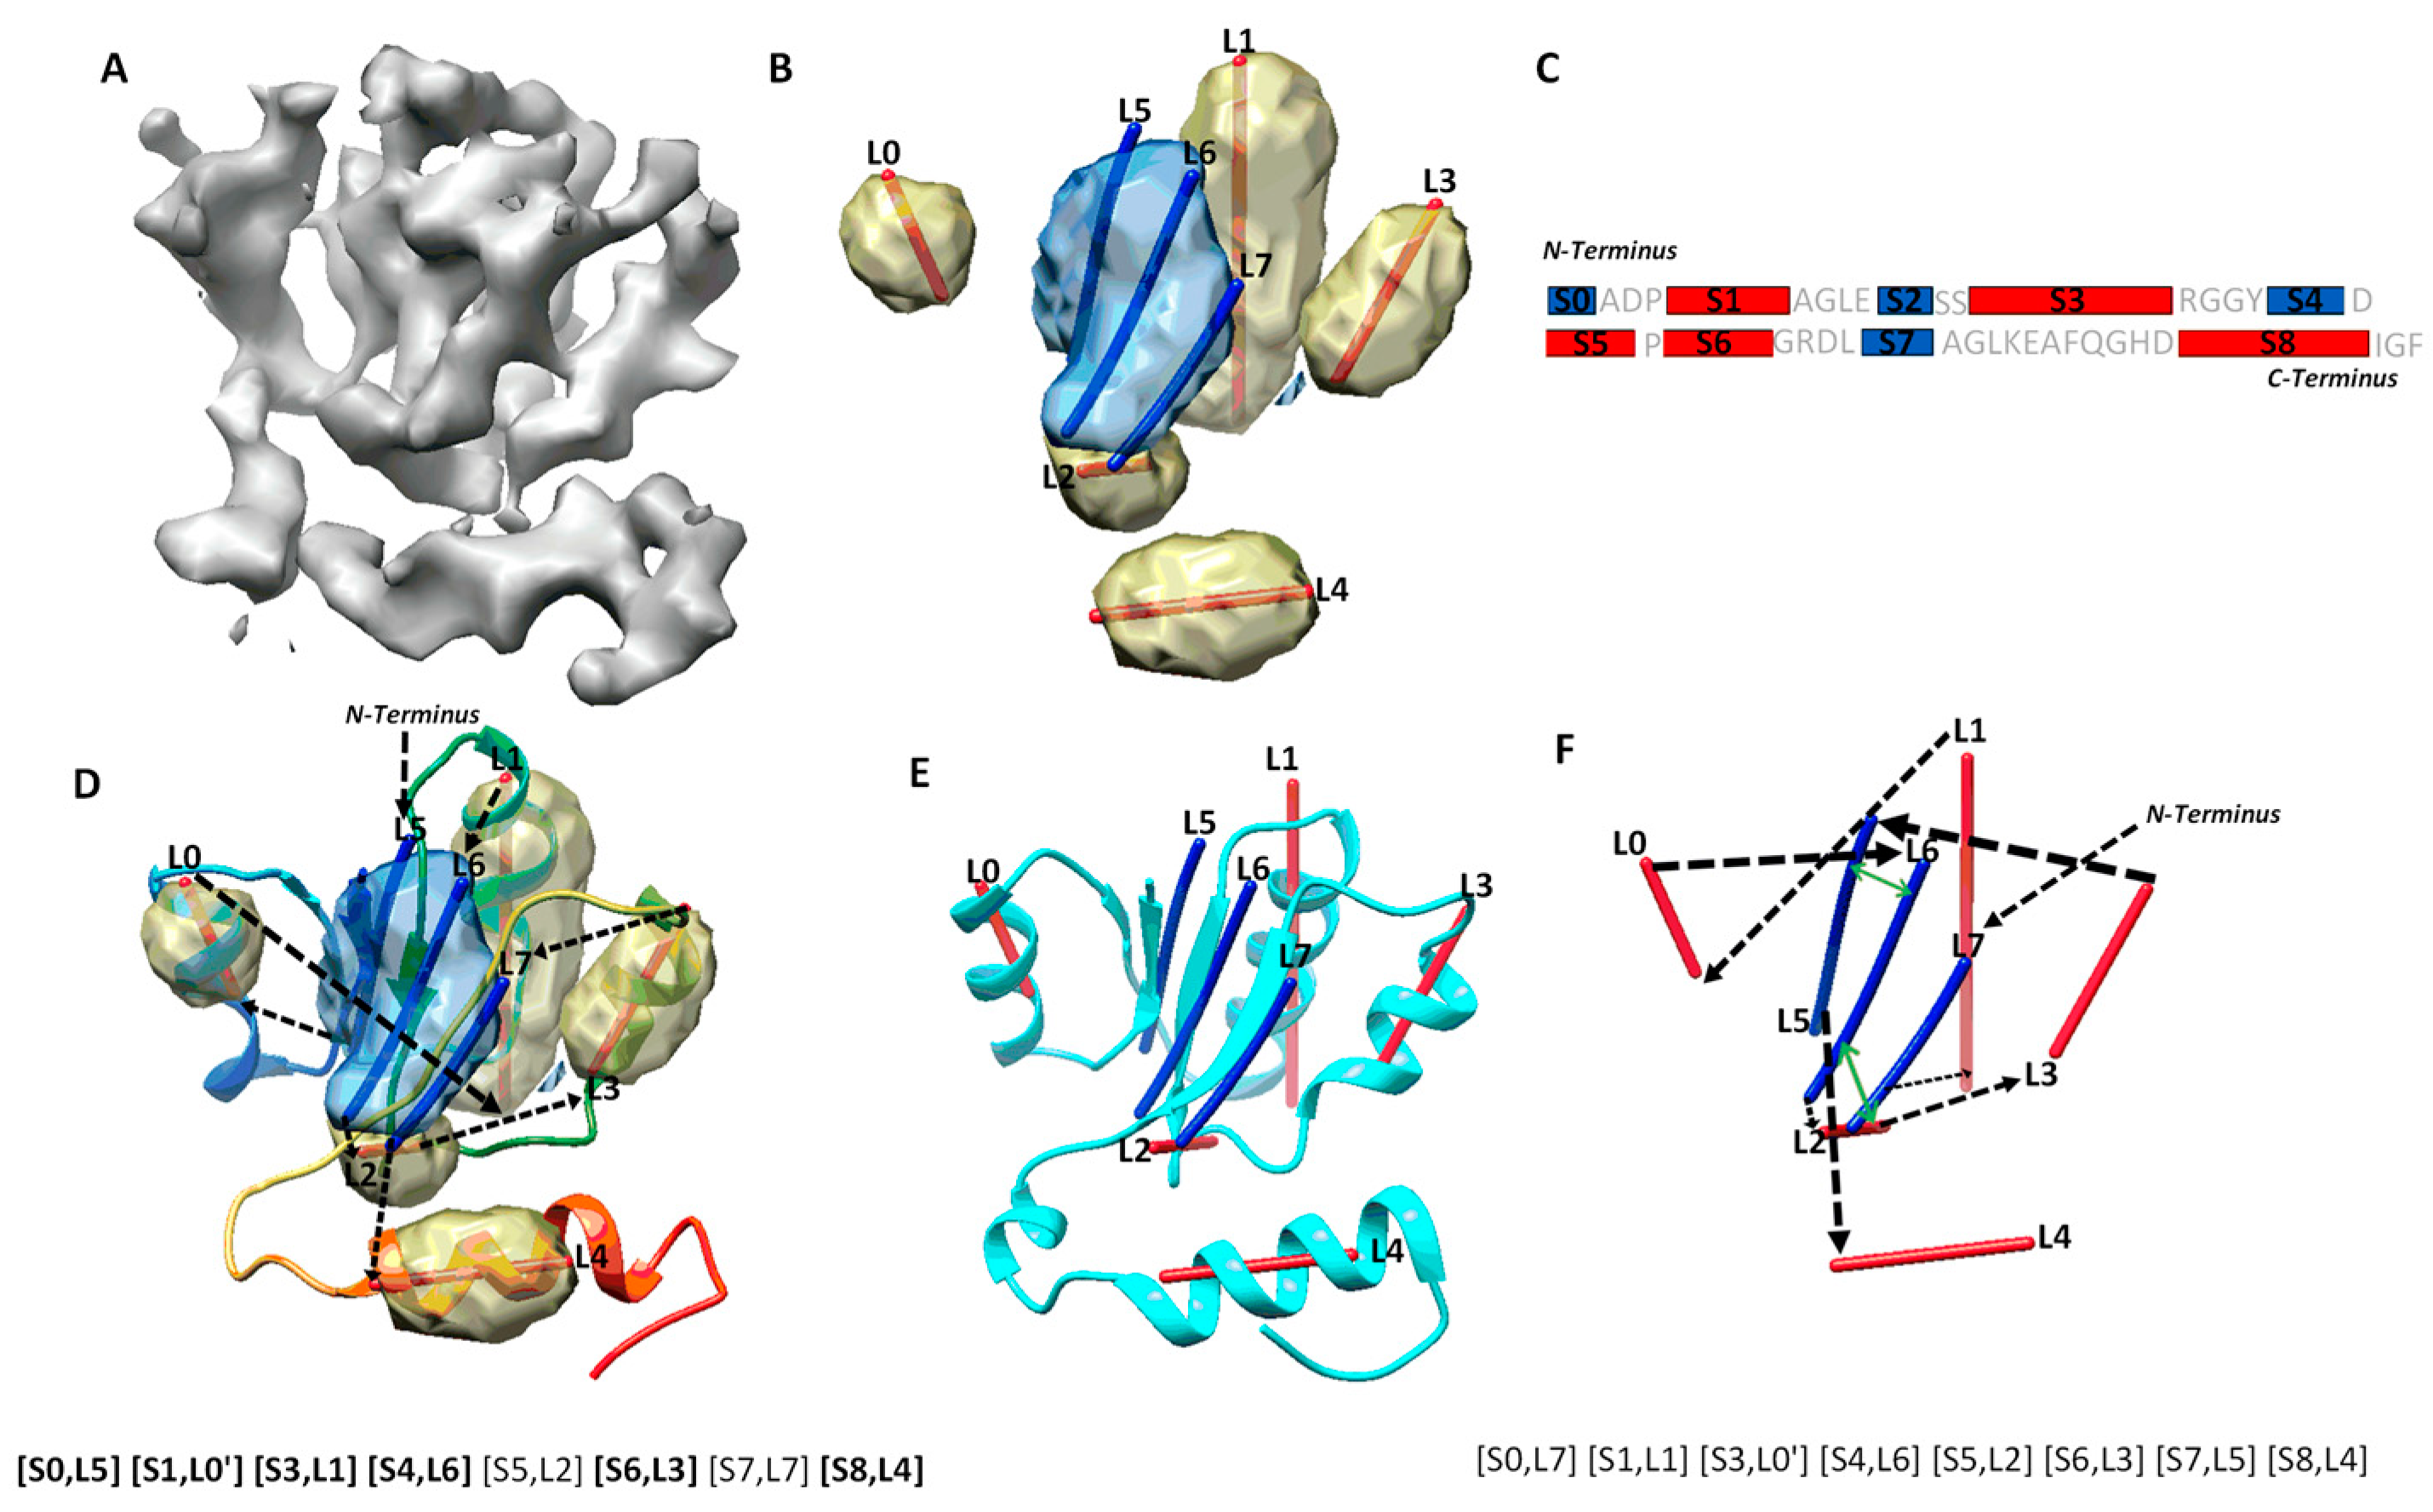 A Cryo-EM Method for Near-atomic Structures in the Intricate Networks